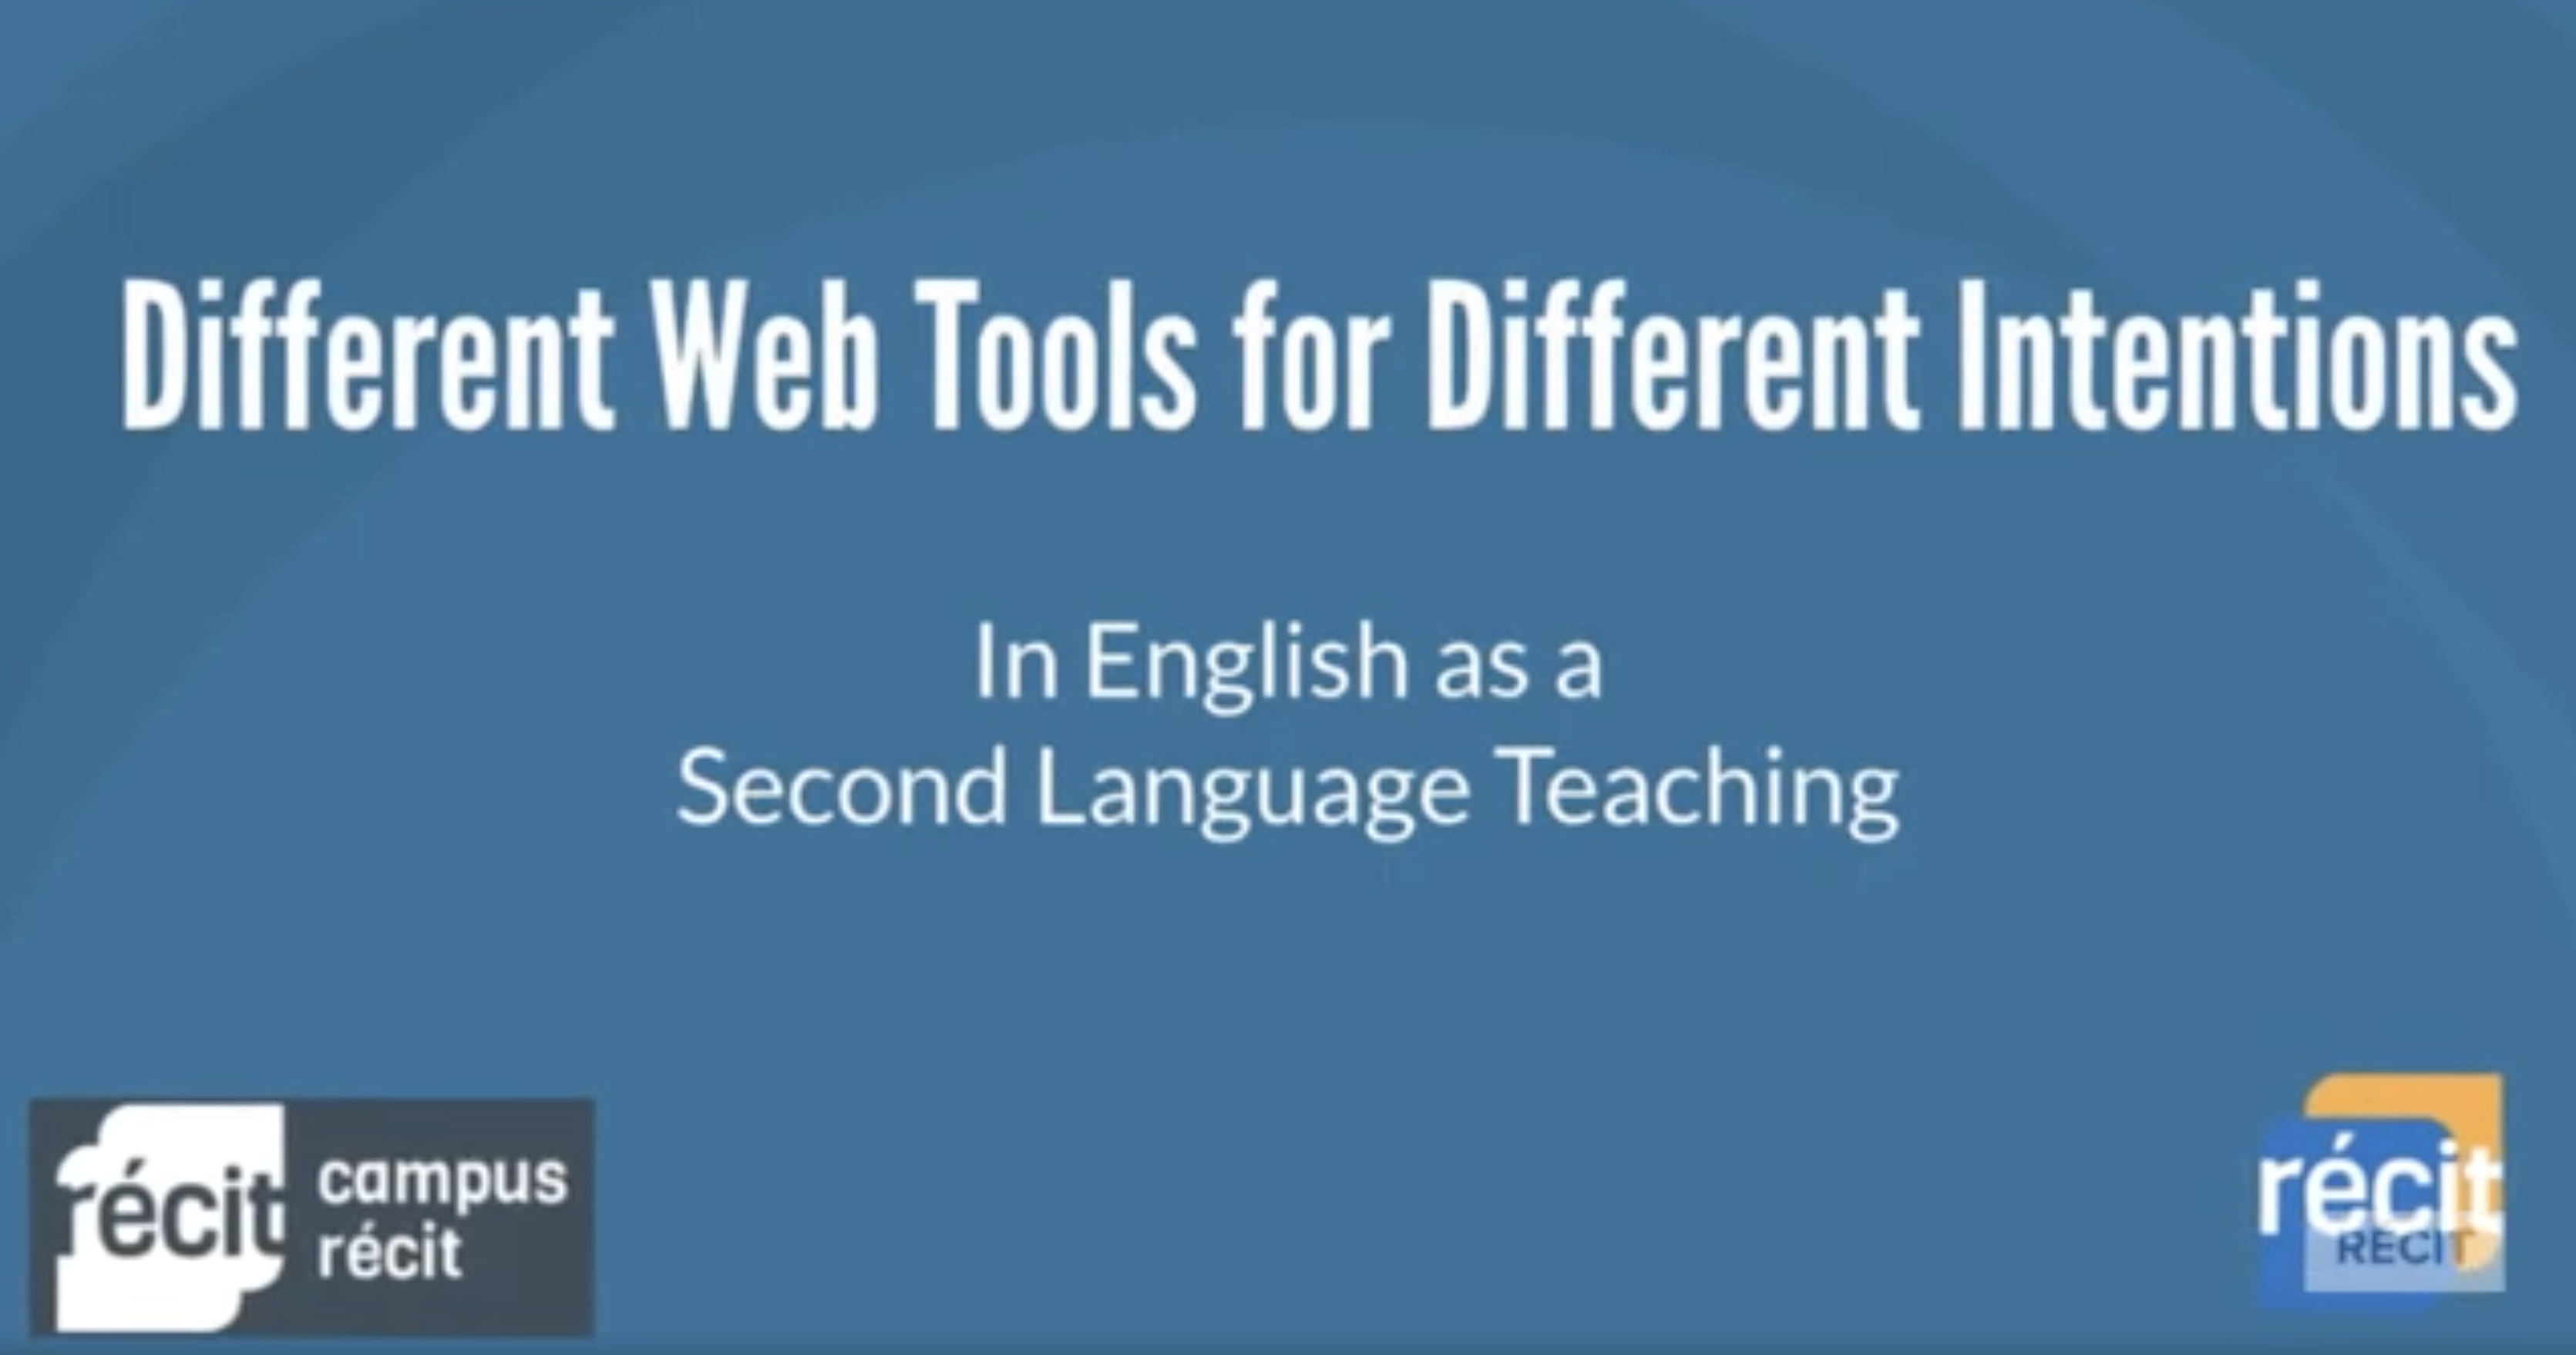 Title of the video: Different Web Tools for Different Intentions